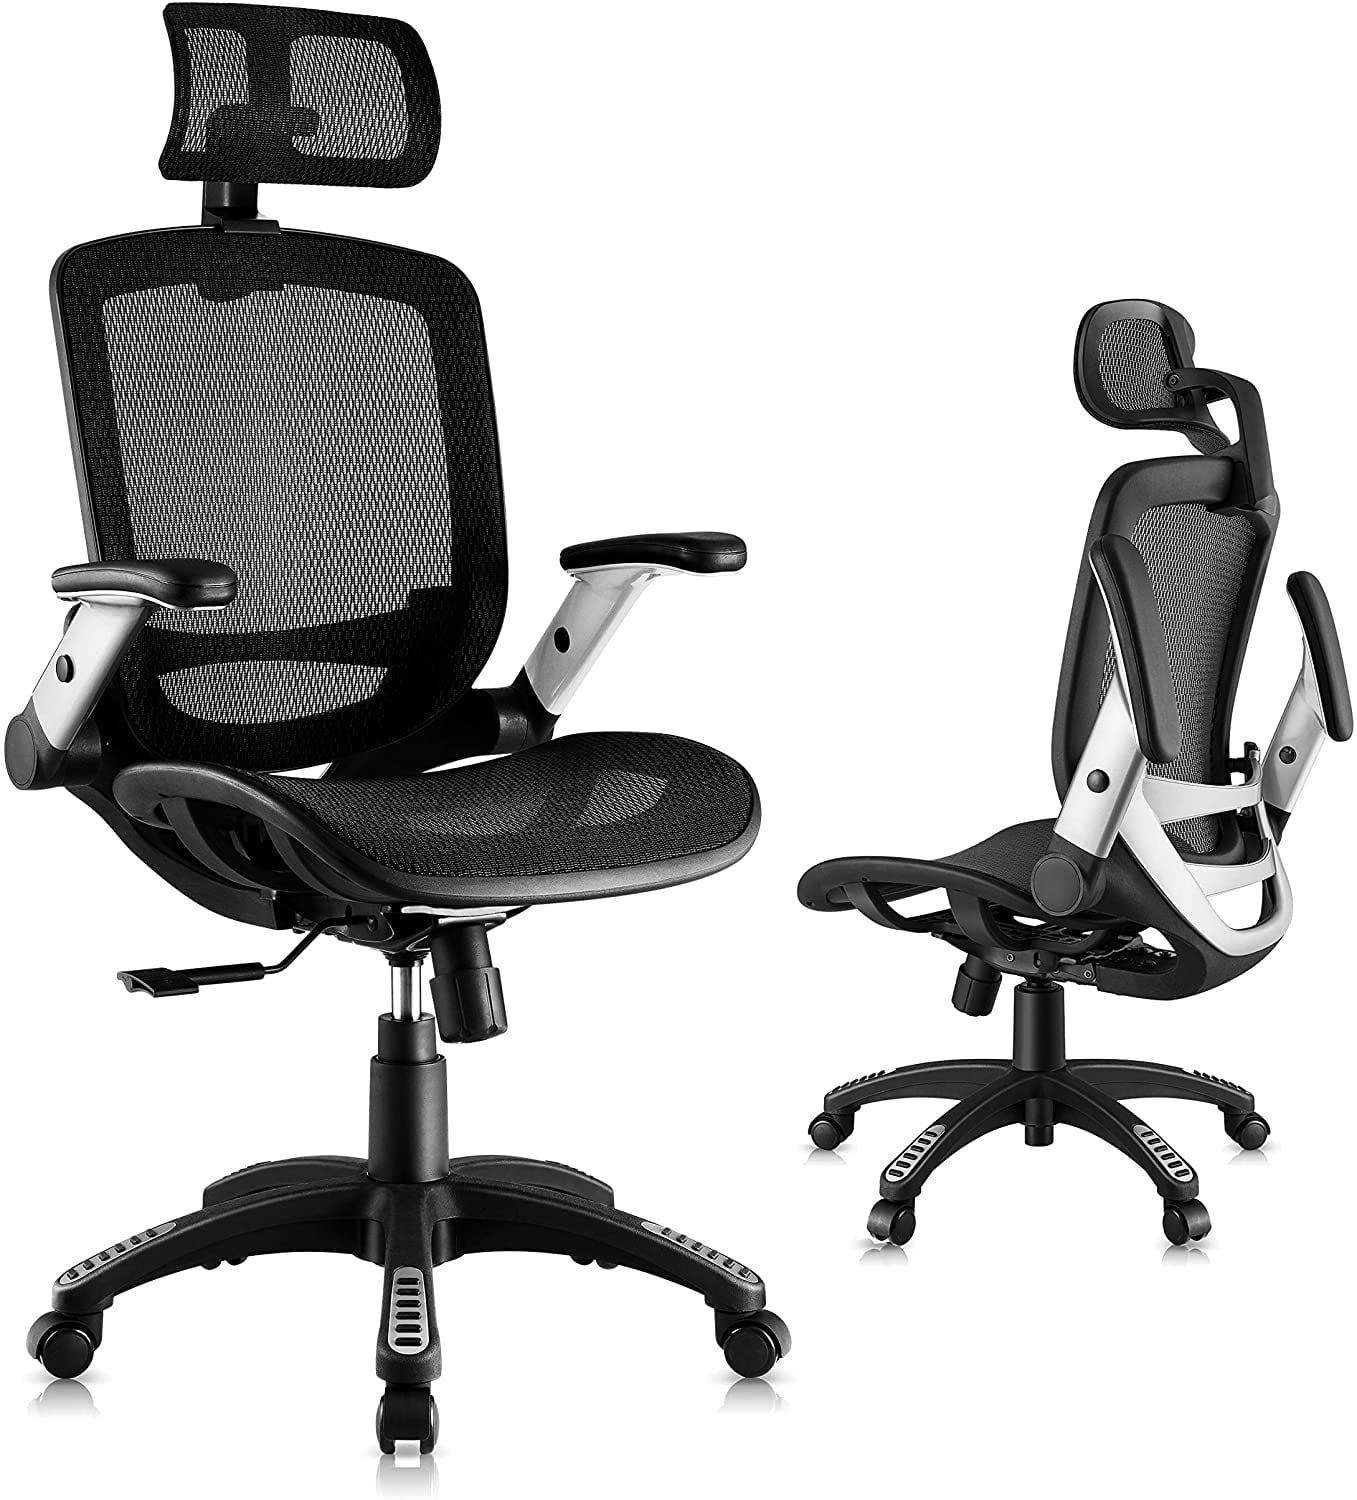 Home Office Chair Ergonomic Desk Chair Mesh Computer Chair with Lumbar Support 